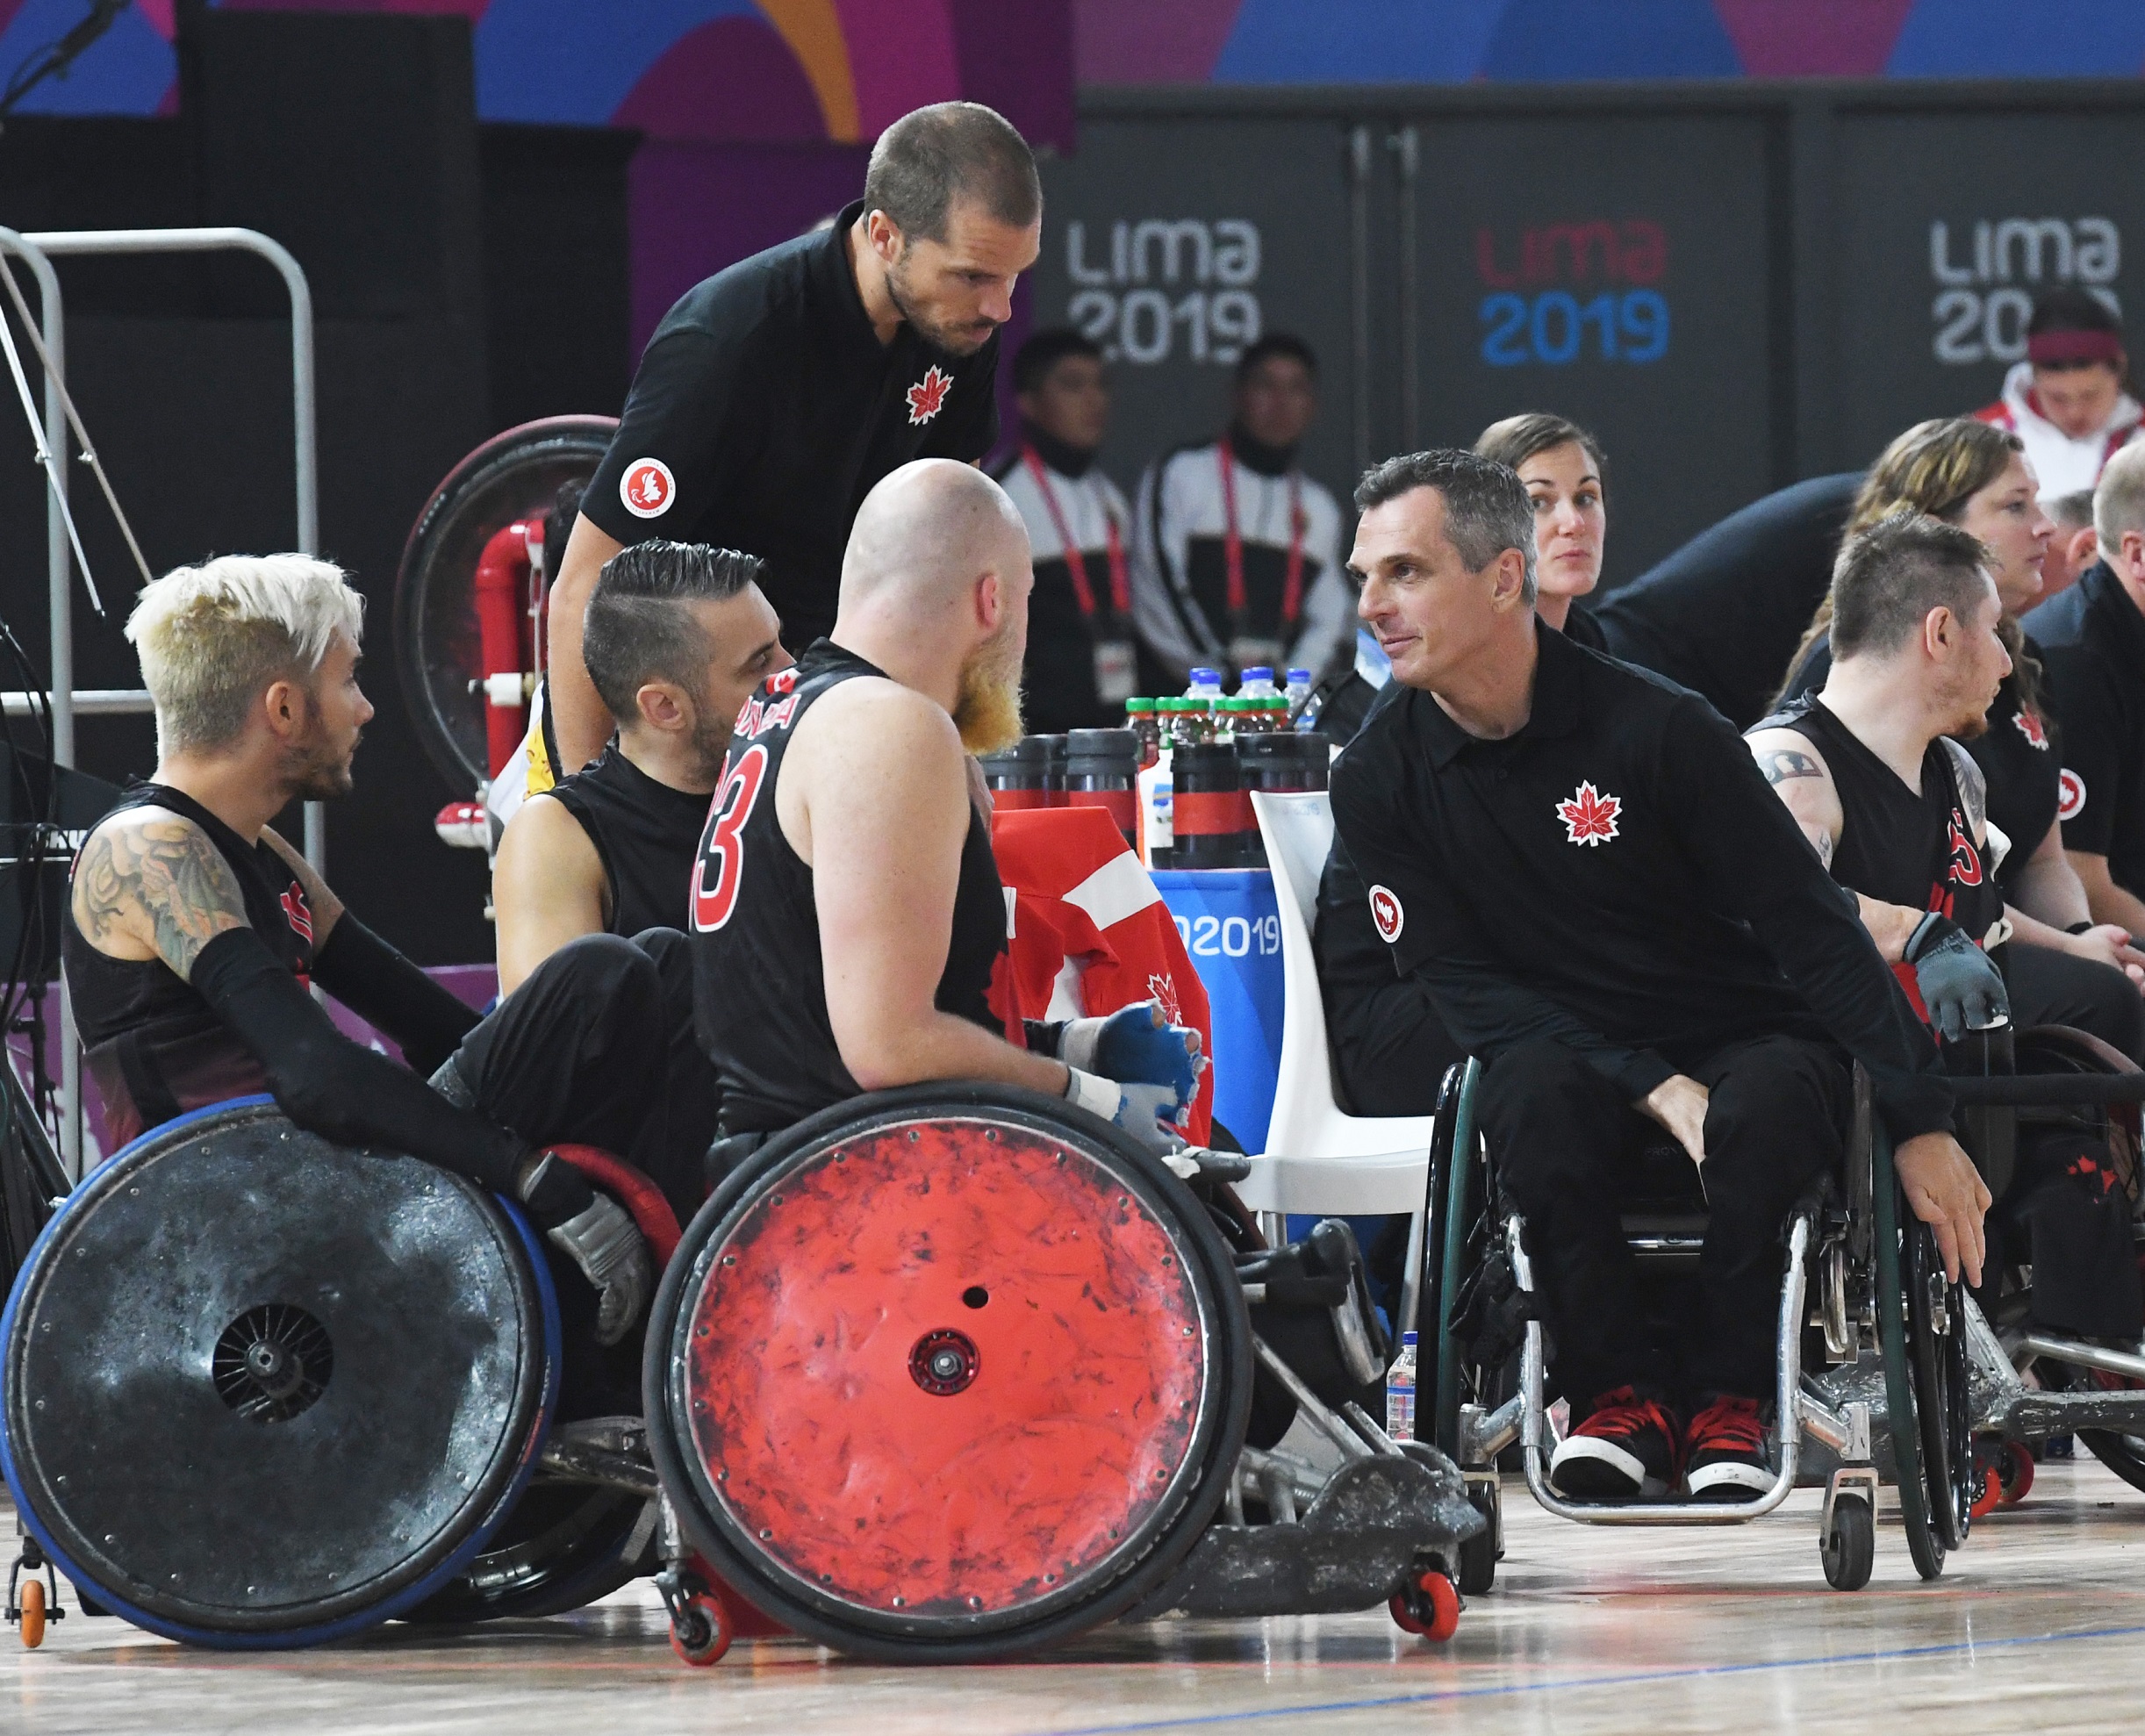 Assistant coach David Willsie dishes out instructions to the wheelchair rugby team at the Lima 2019 Parapan Am Games